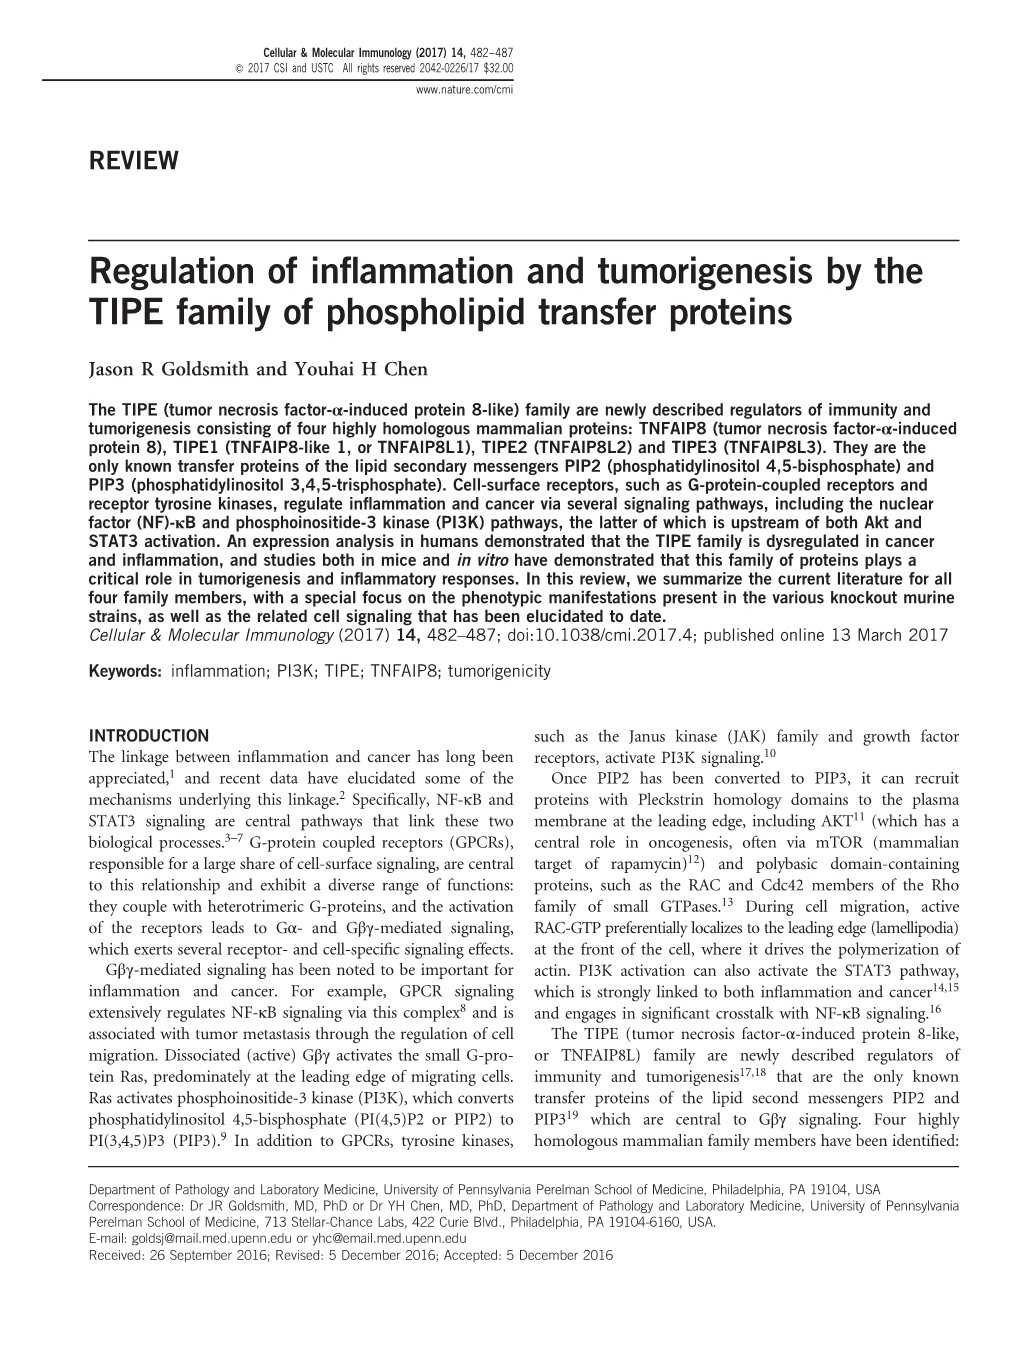 Regulation of Inflammation and Tumorigenesis by the TIPE Family Of